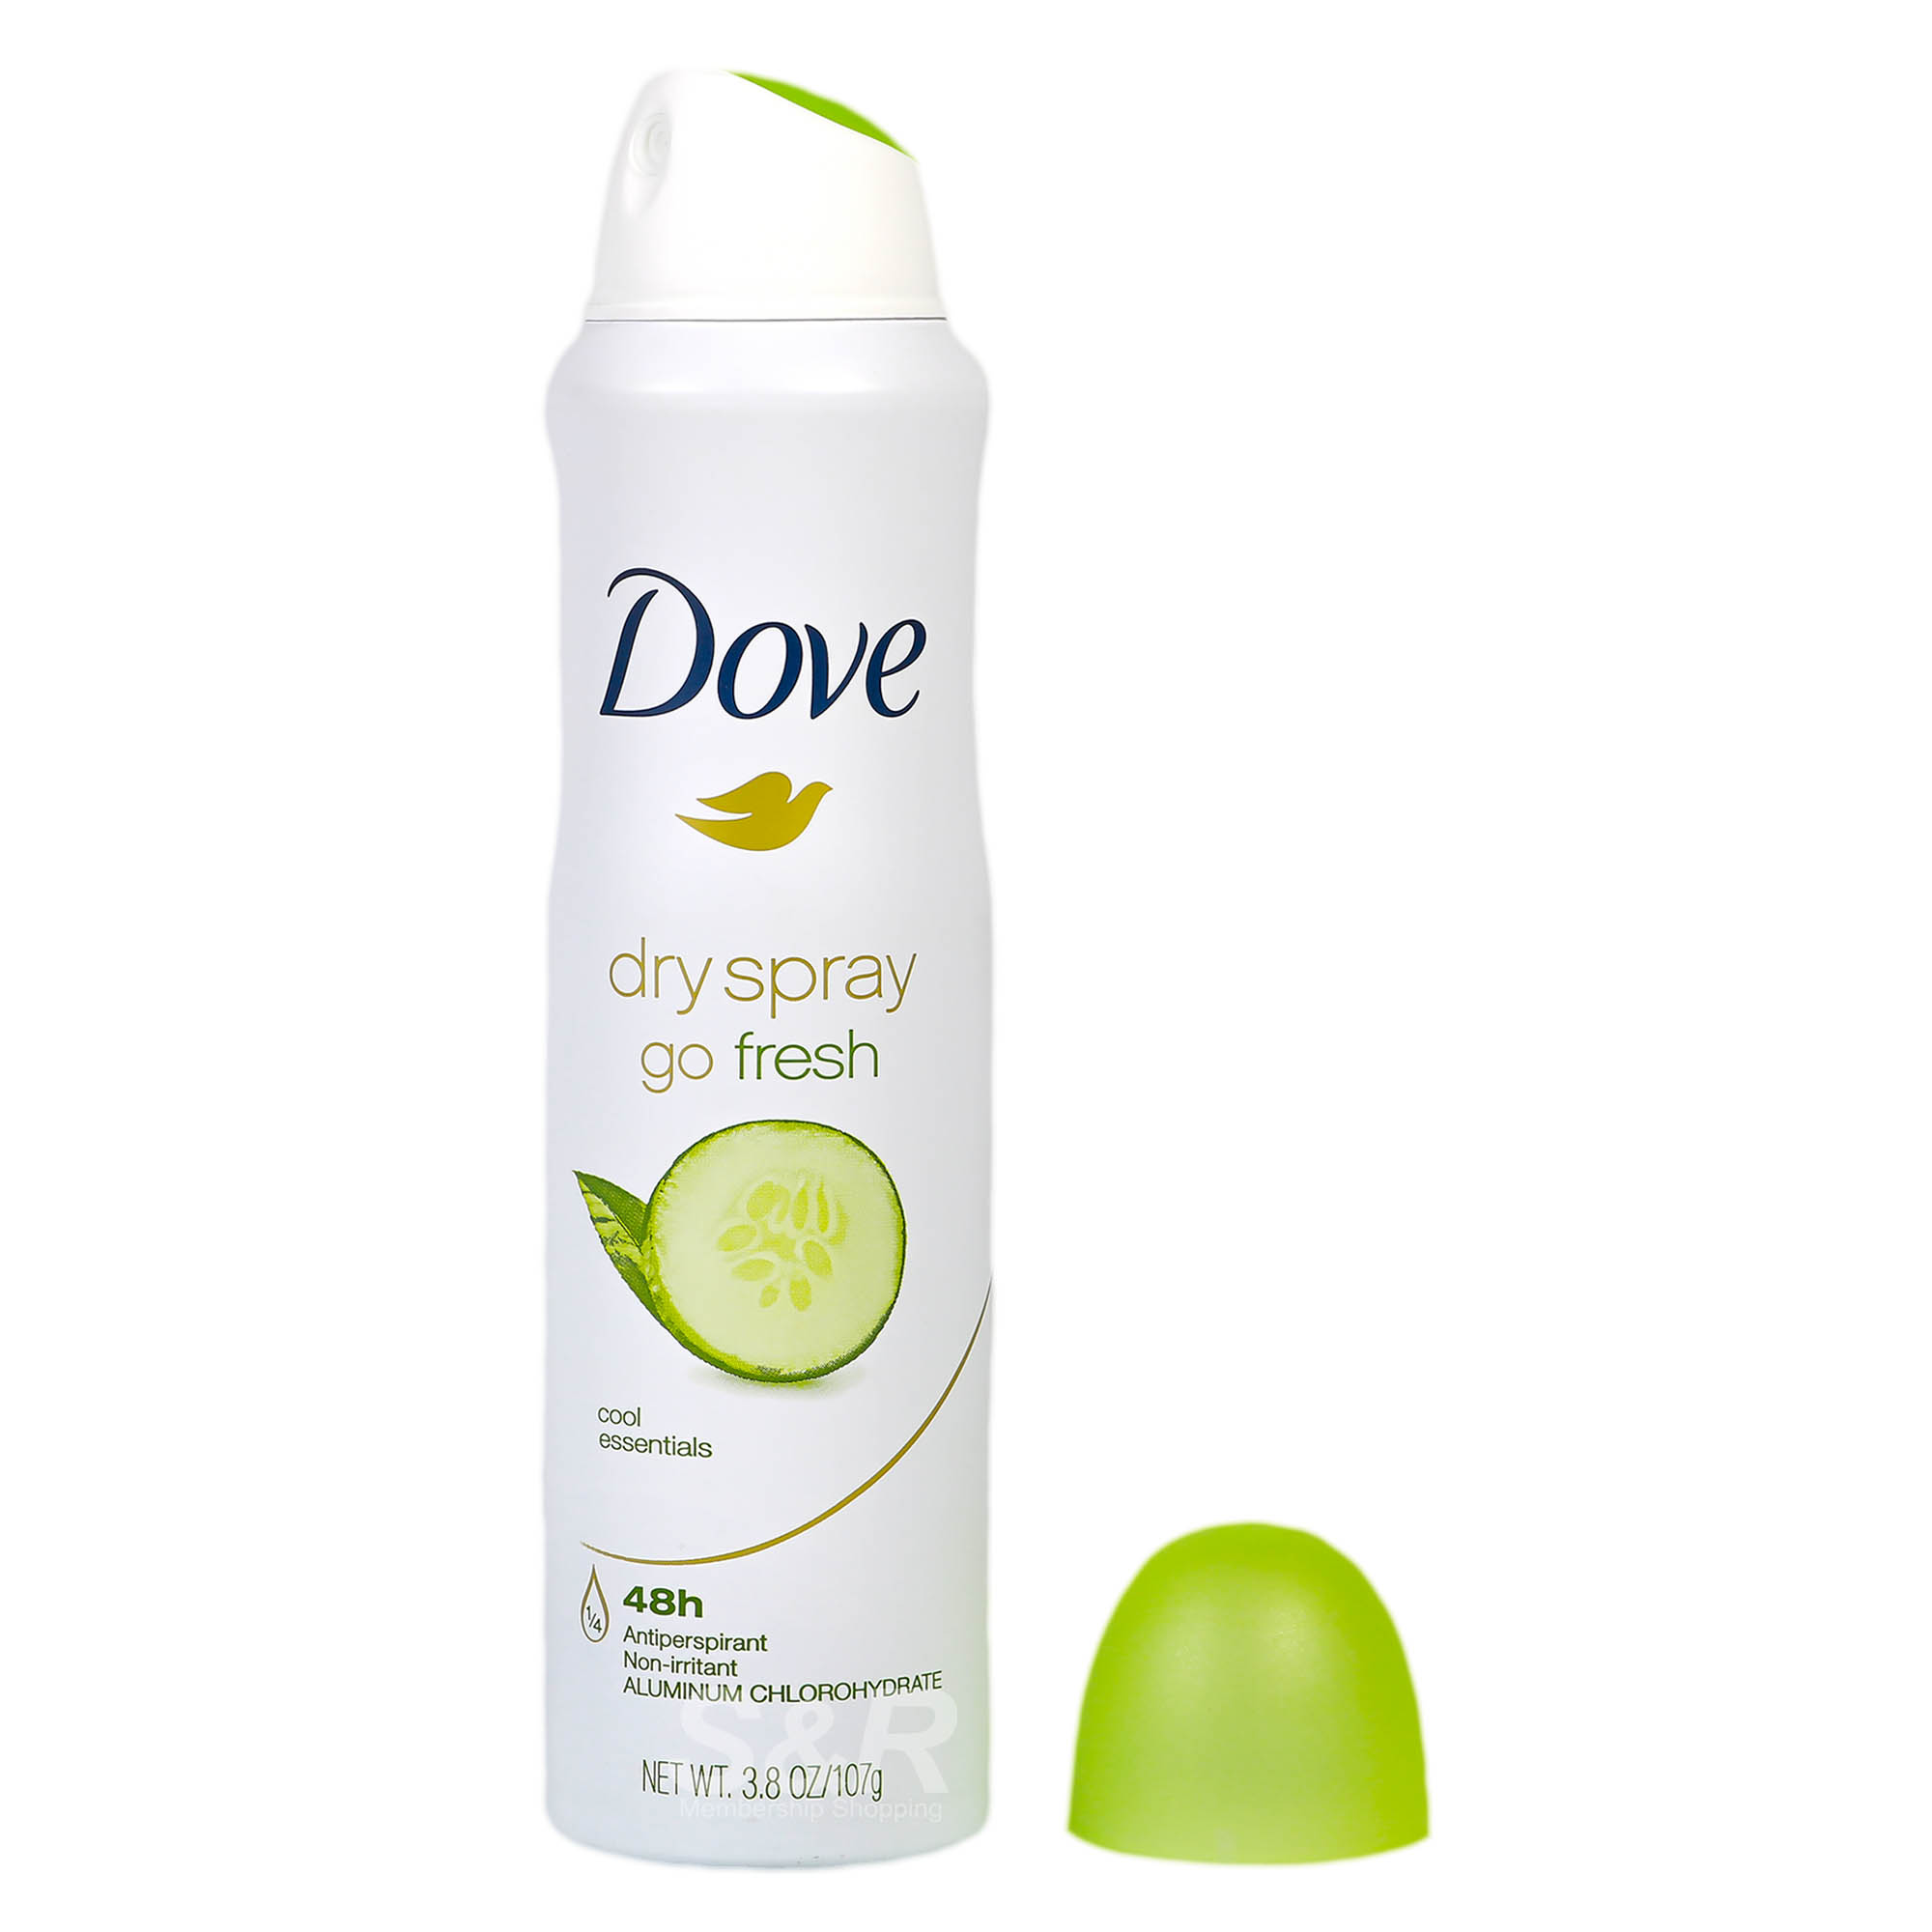 Dove Dry Spray Go Fresh Cool Essentials Cucumber and Green Tea Scent 107g